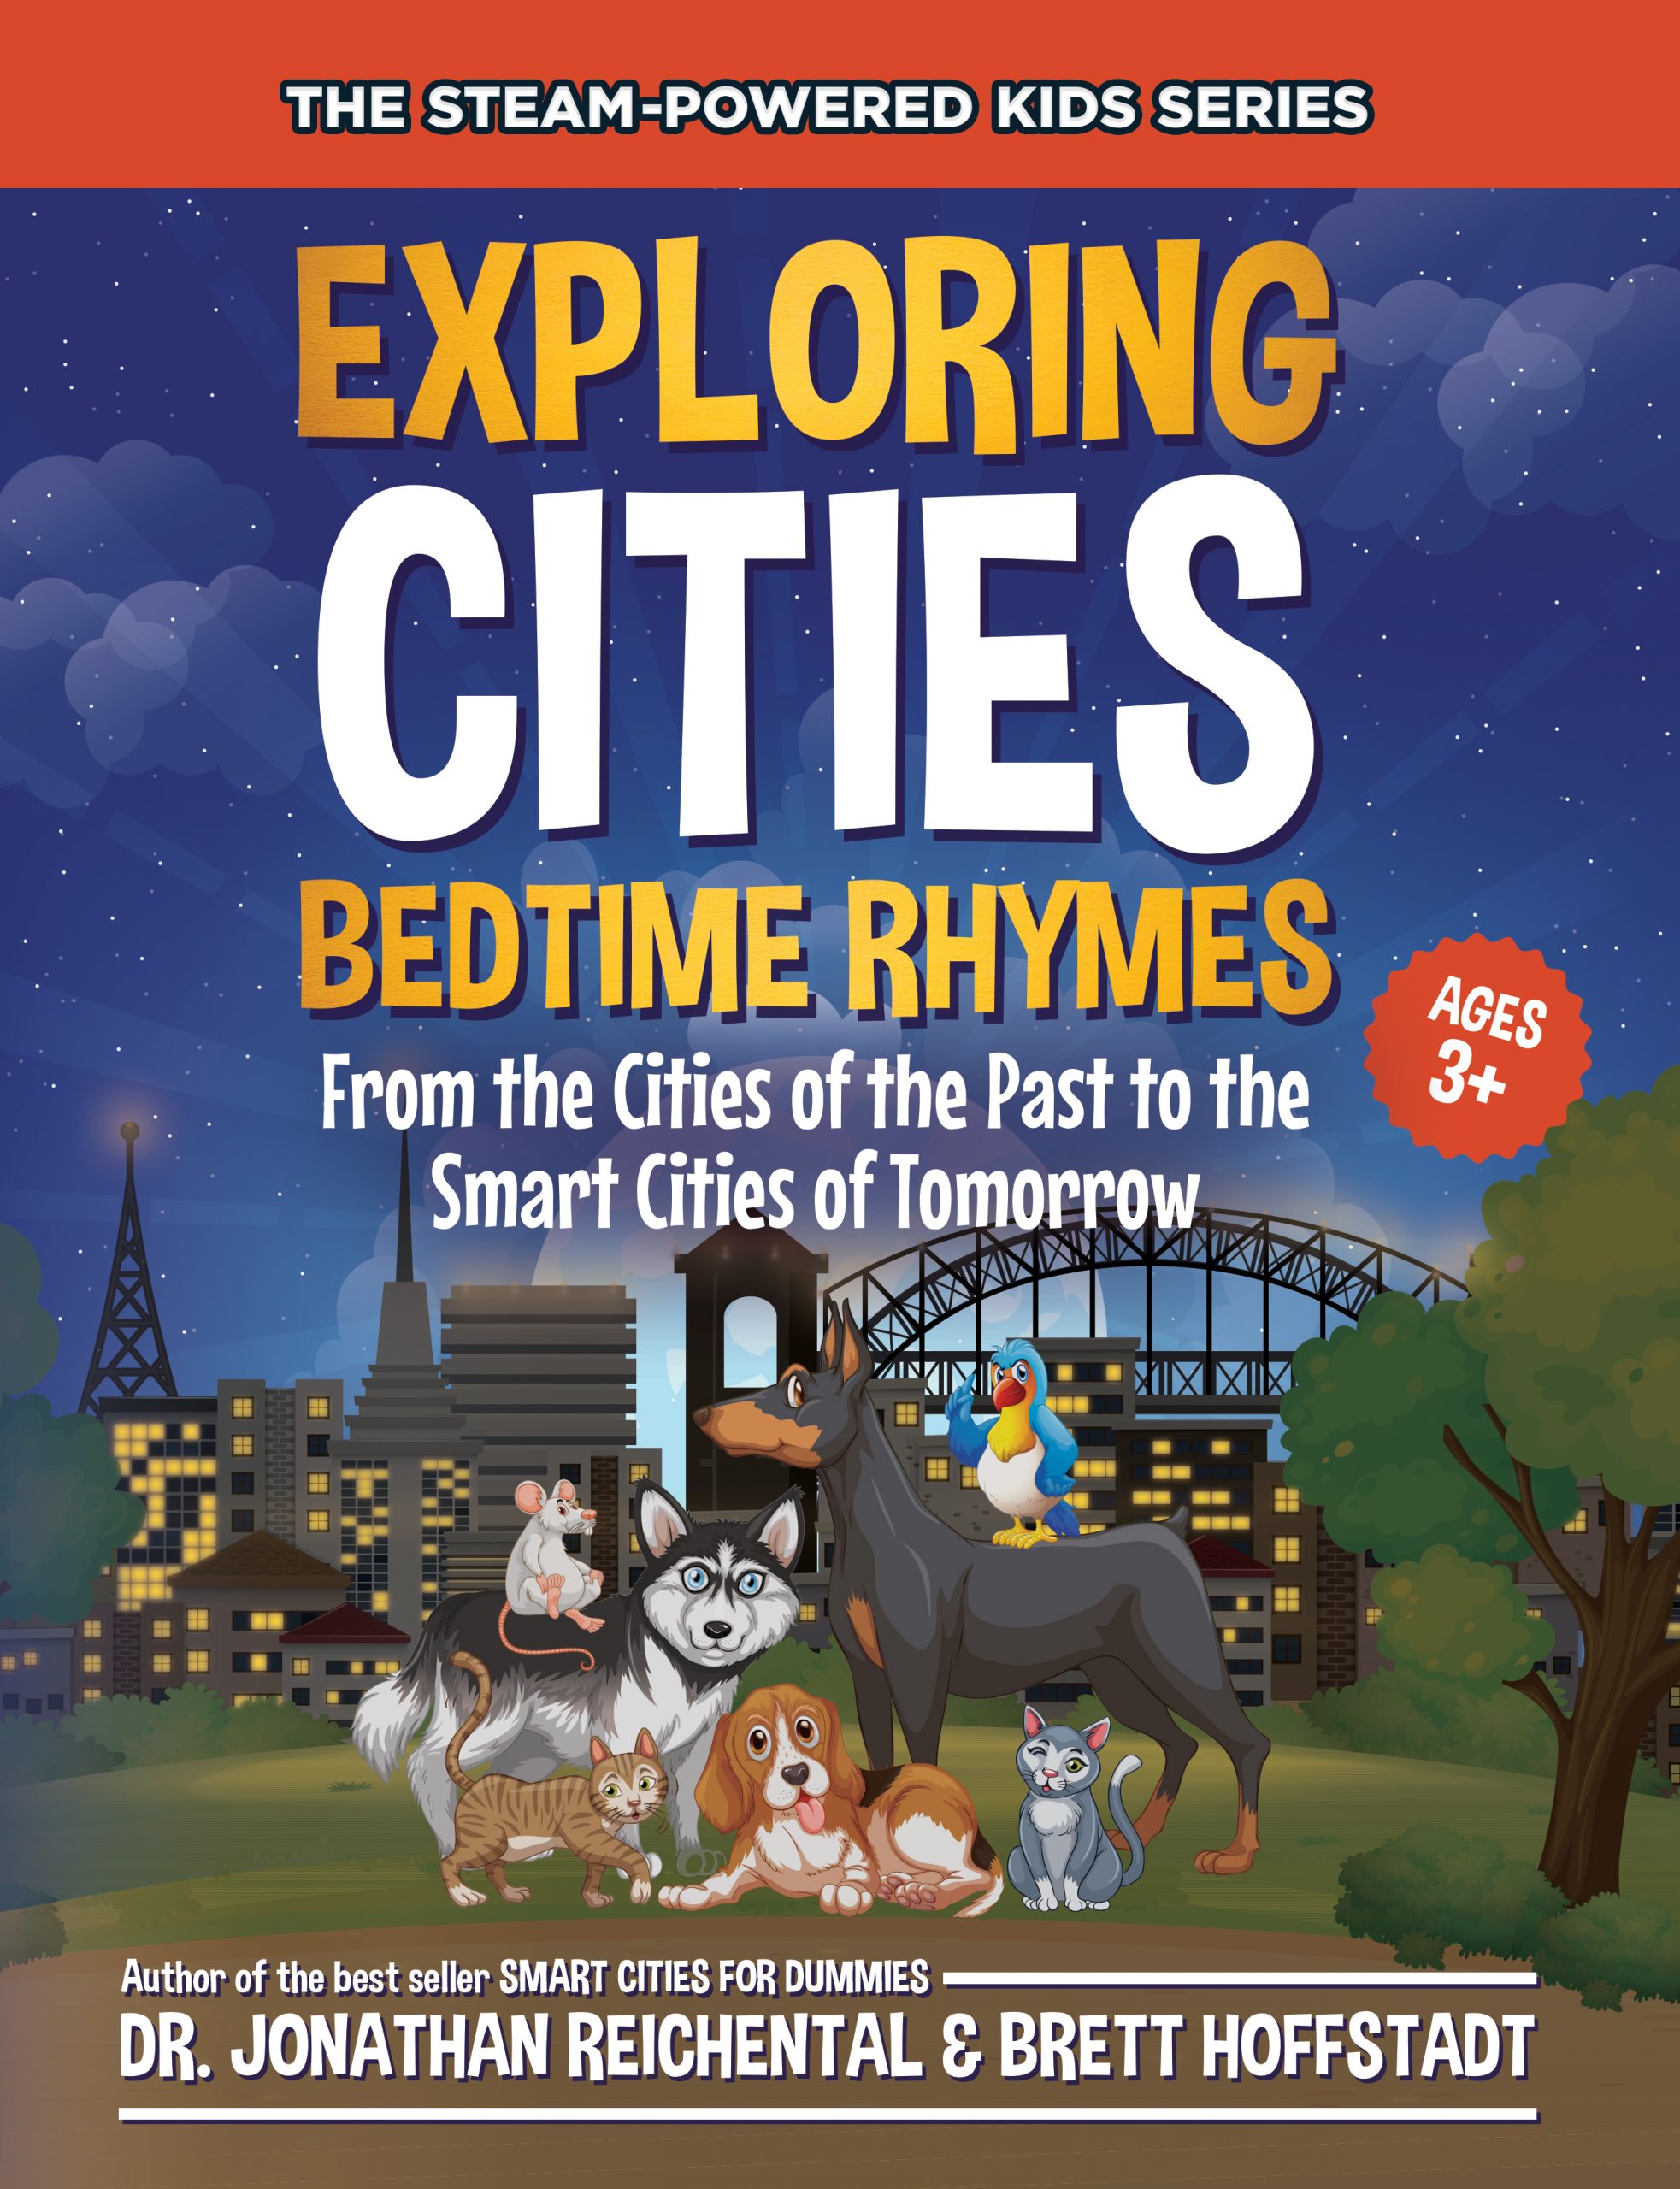 New Release: Exploring Cities Bedtime Rhymes Available for Pre-order